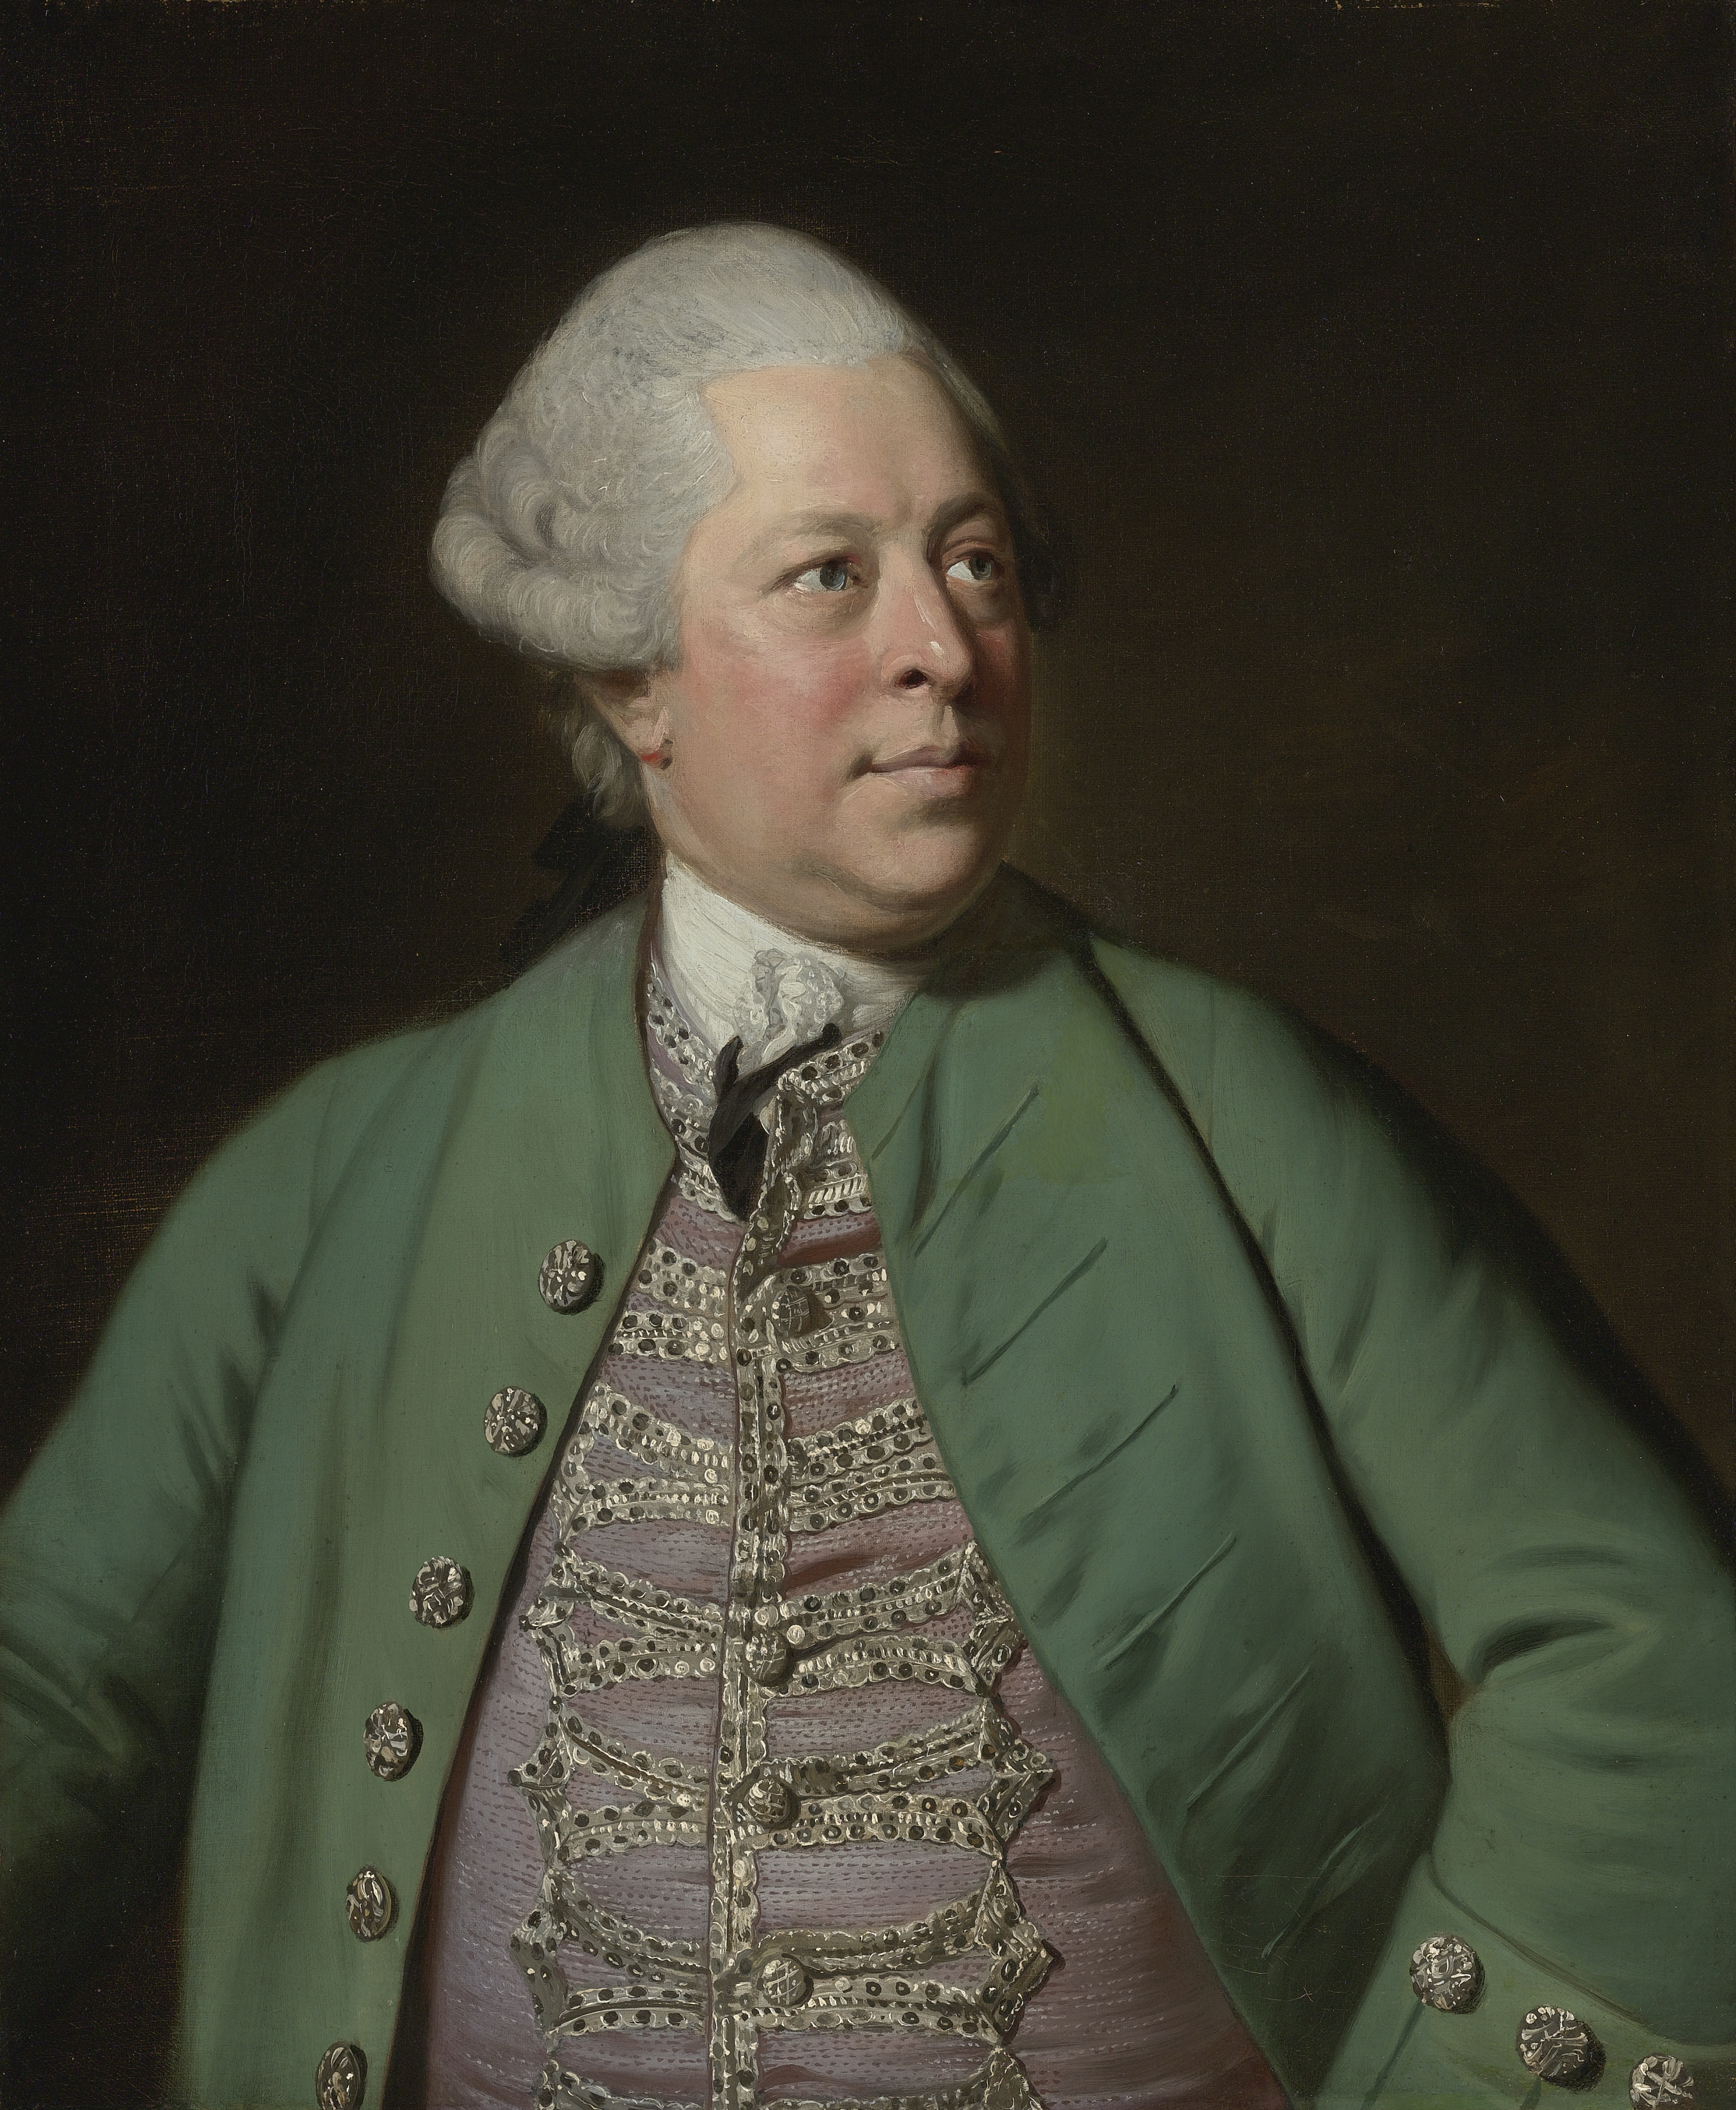 Sir Joshua Reynolds - Portrait of Edward Holden Cruttenden, Director of the East India Company